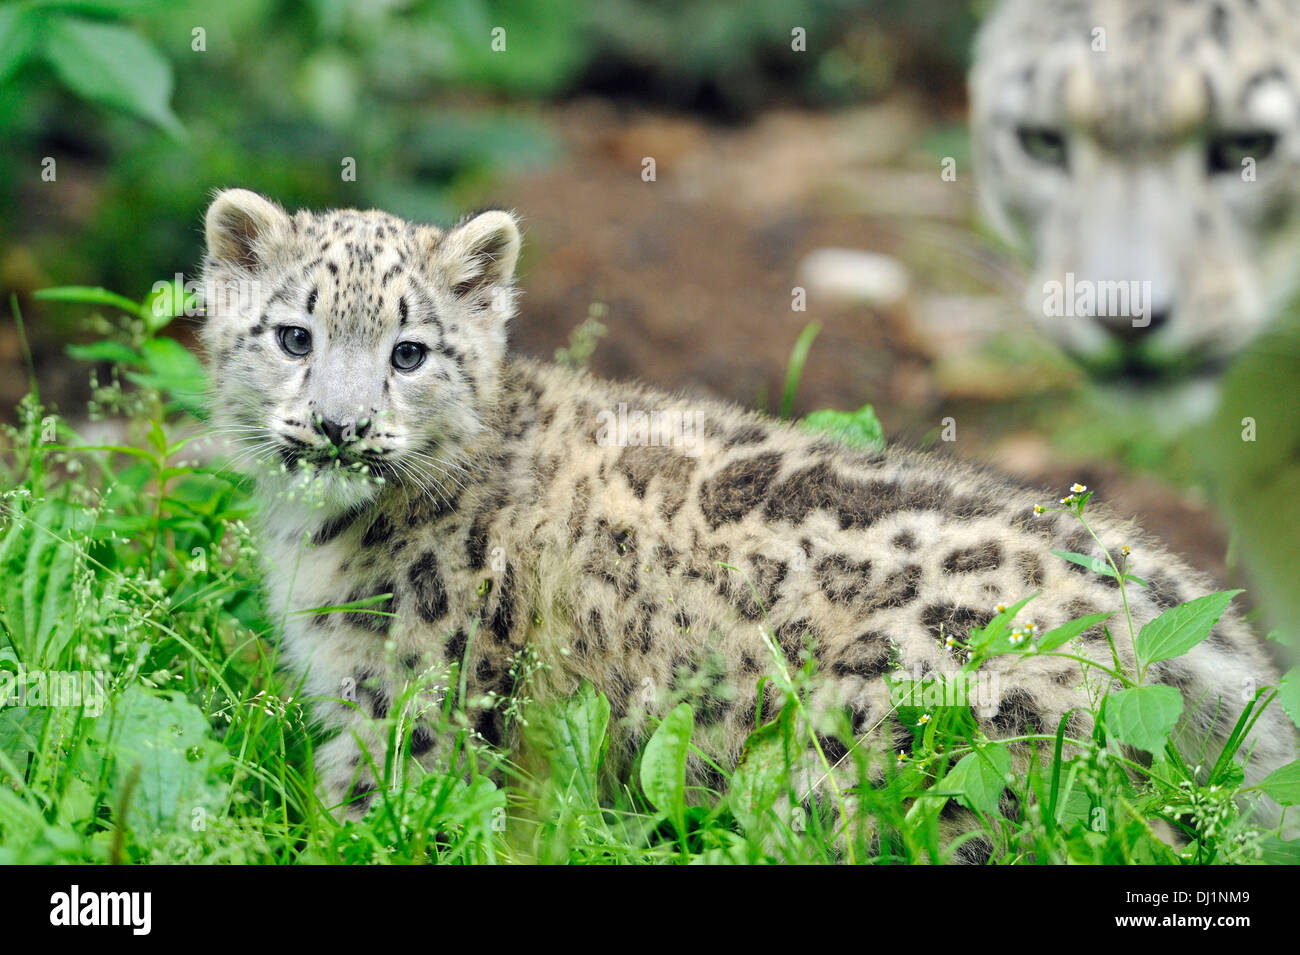 Snow Leopard Panthera unica Cub with mother zoo Stock Photo